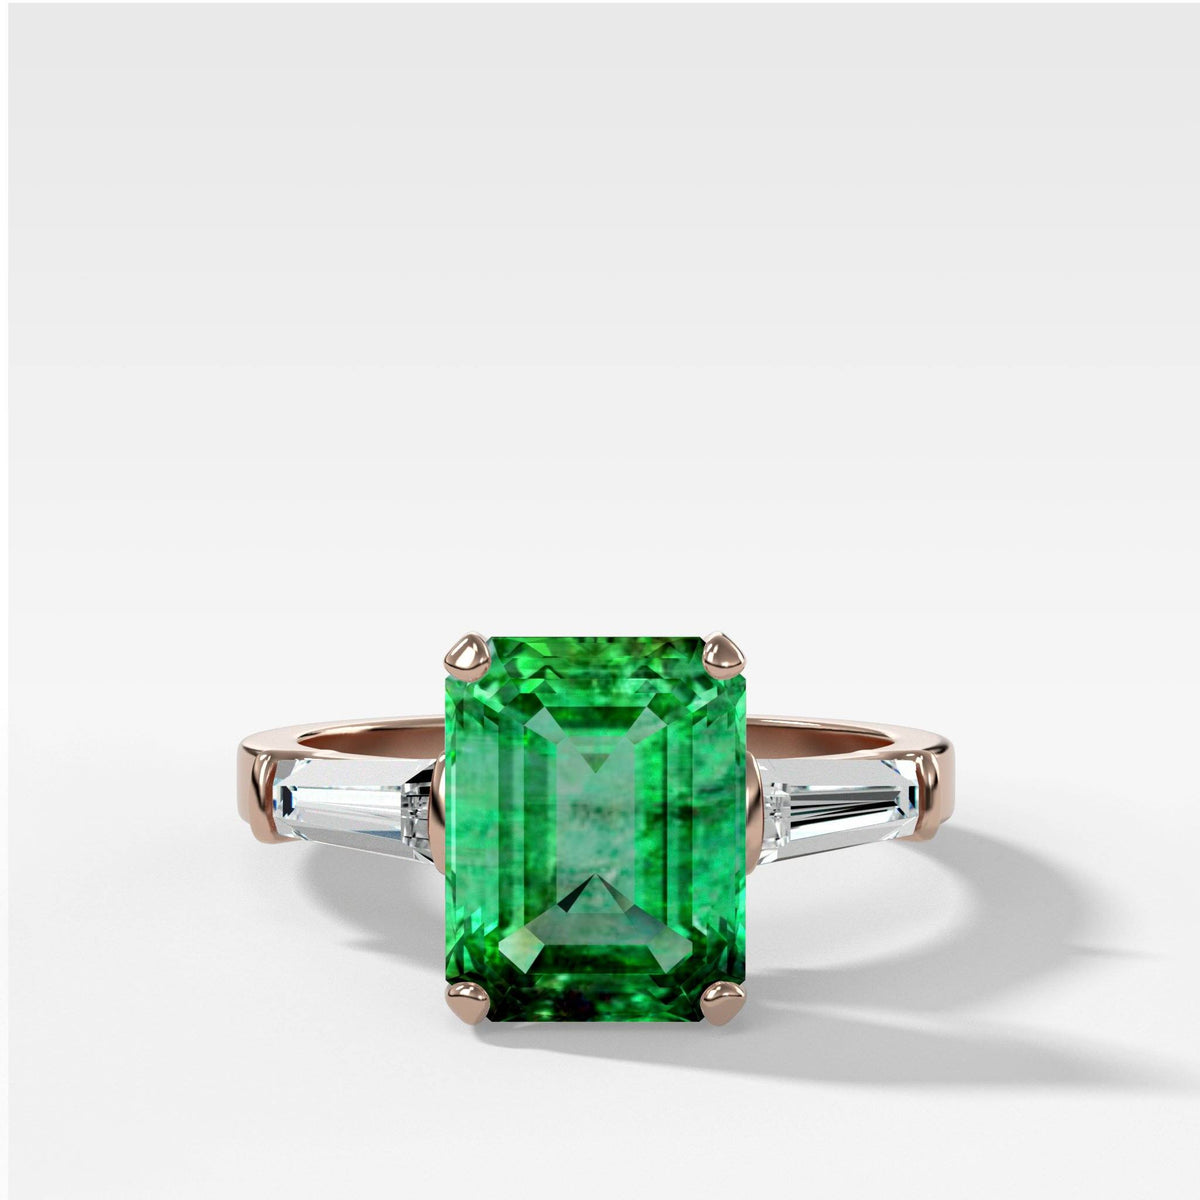 Emerald cut Emerald Translunar Ring with Tapered Baguette Diamond sides by Good Stone in Rose Gold